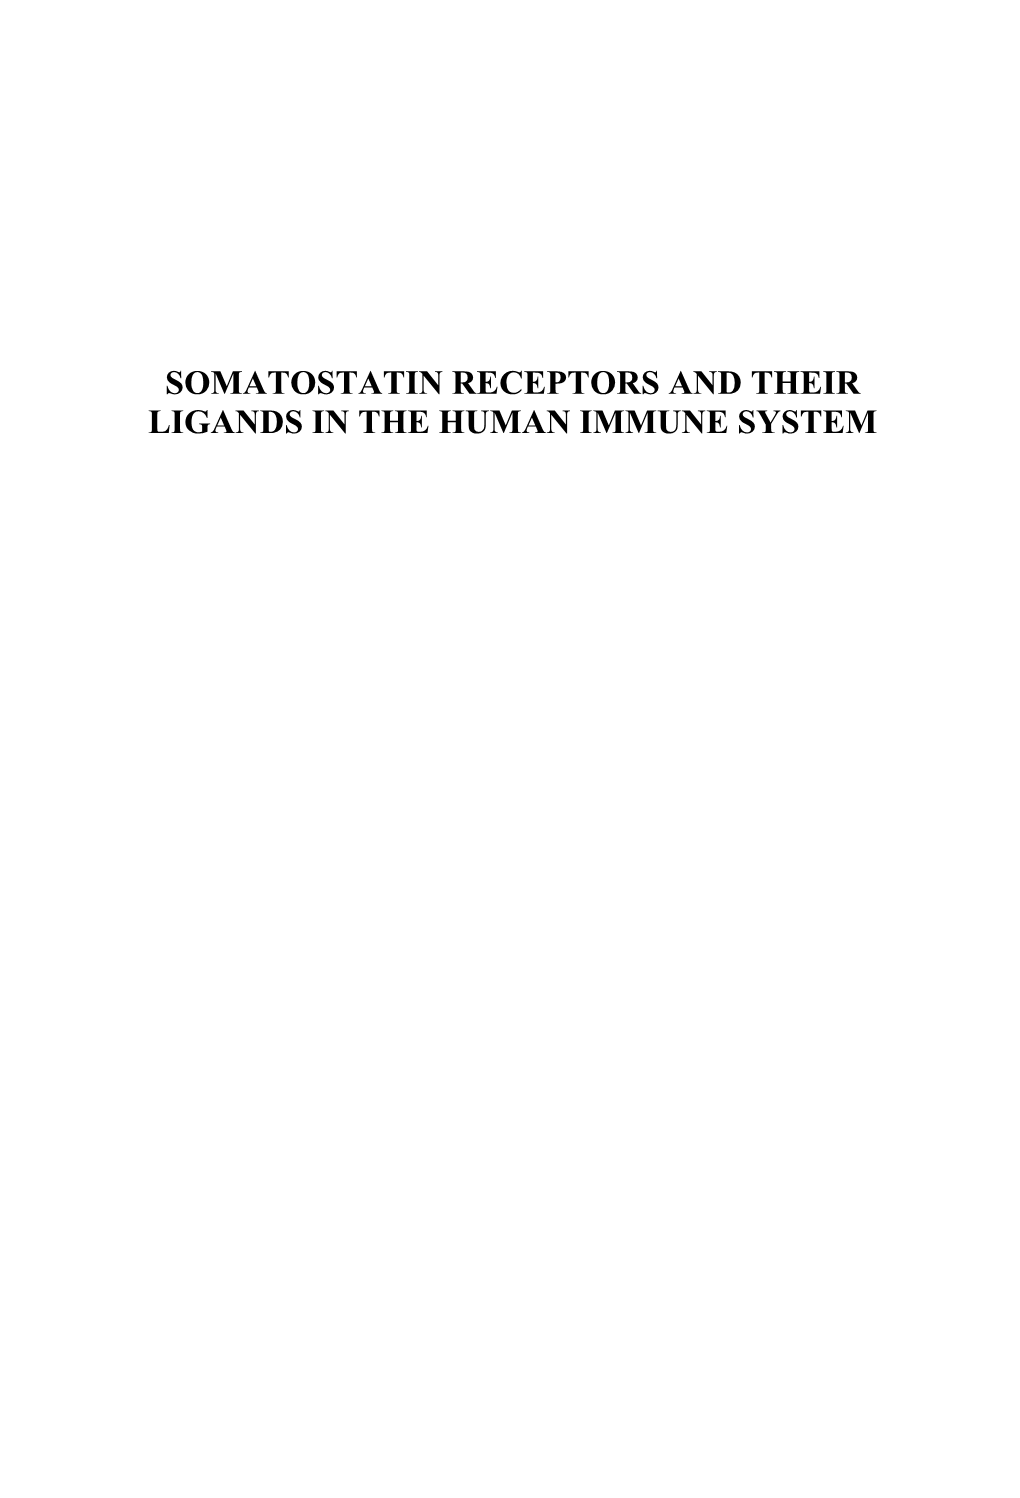 Somatostatin Receptors and Their Ligands in the Human Immune System